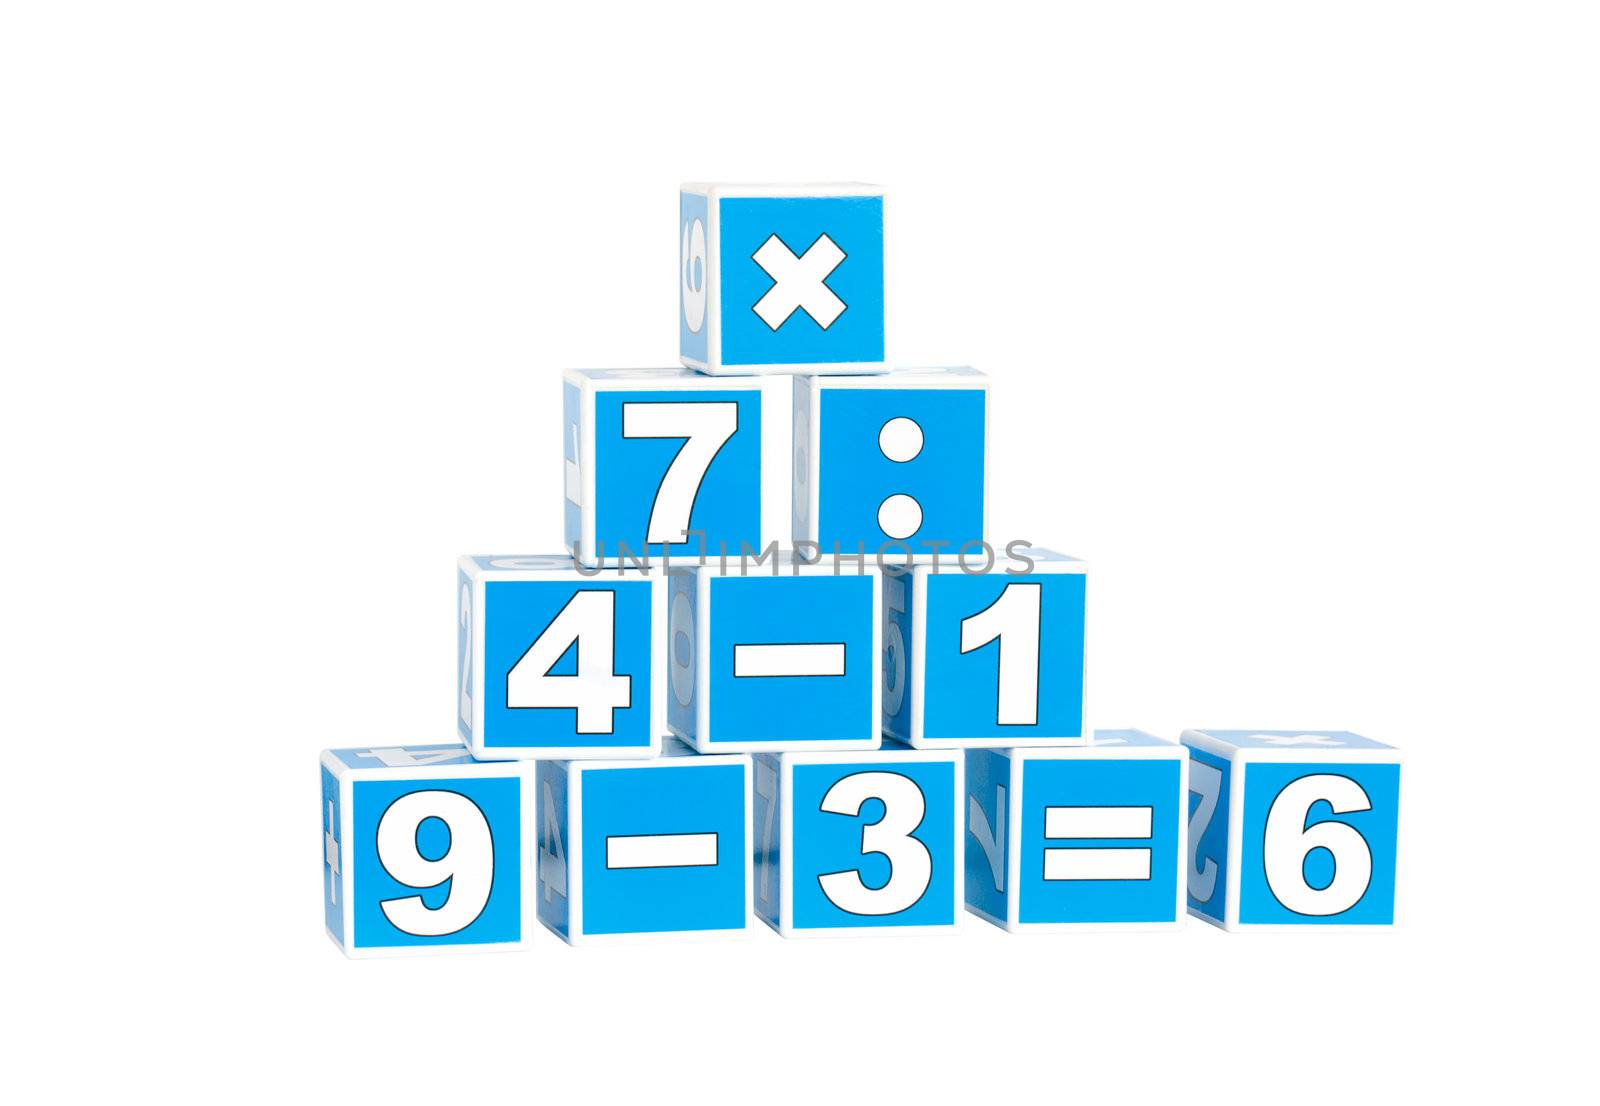 Blue cubes with numbers, isolated on a white background.